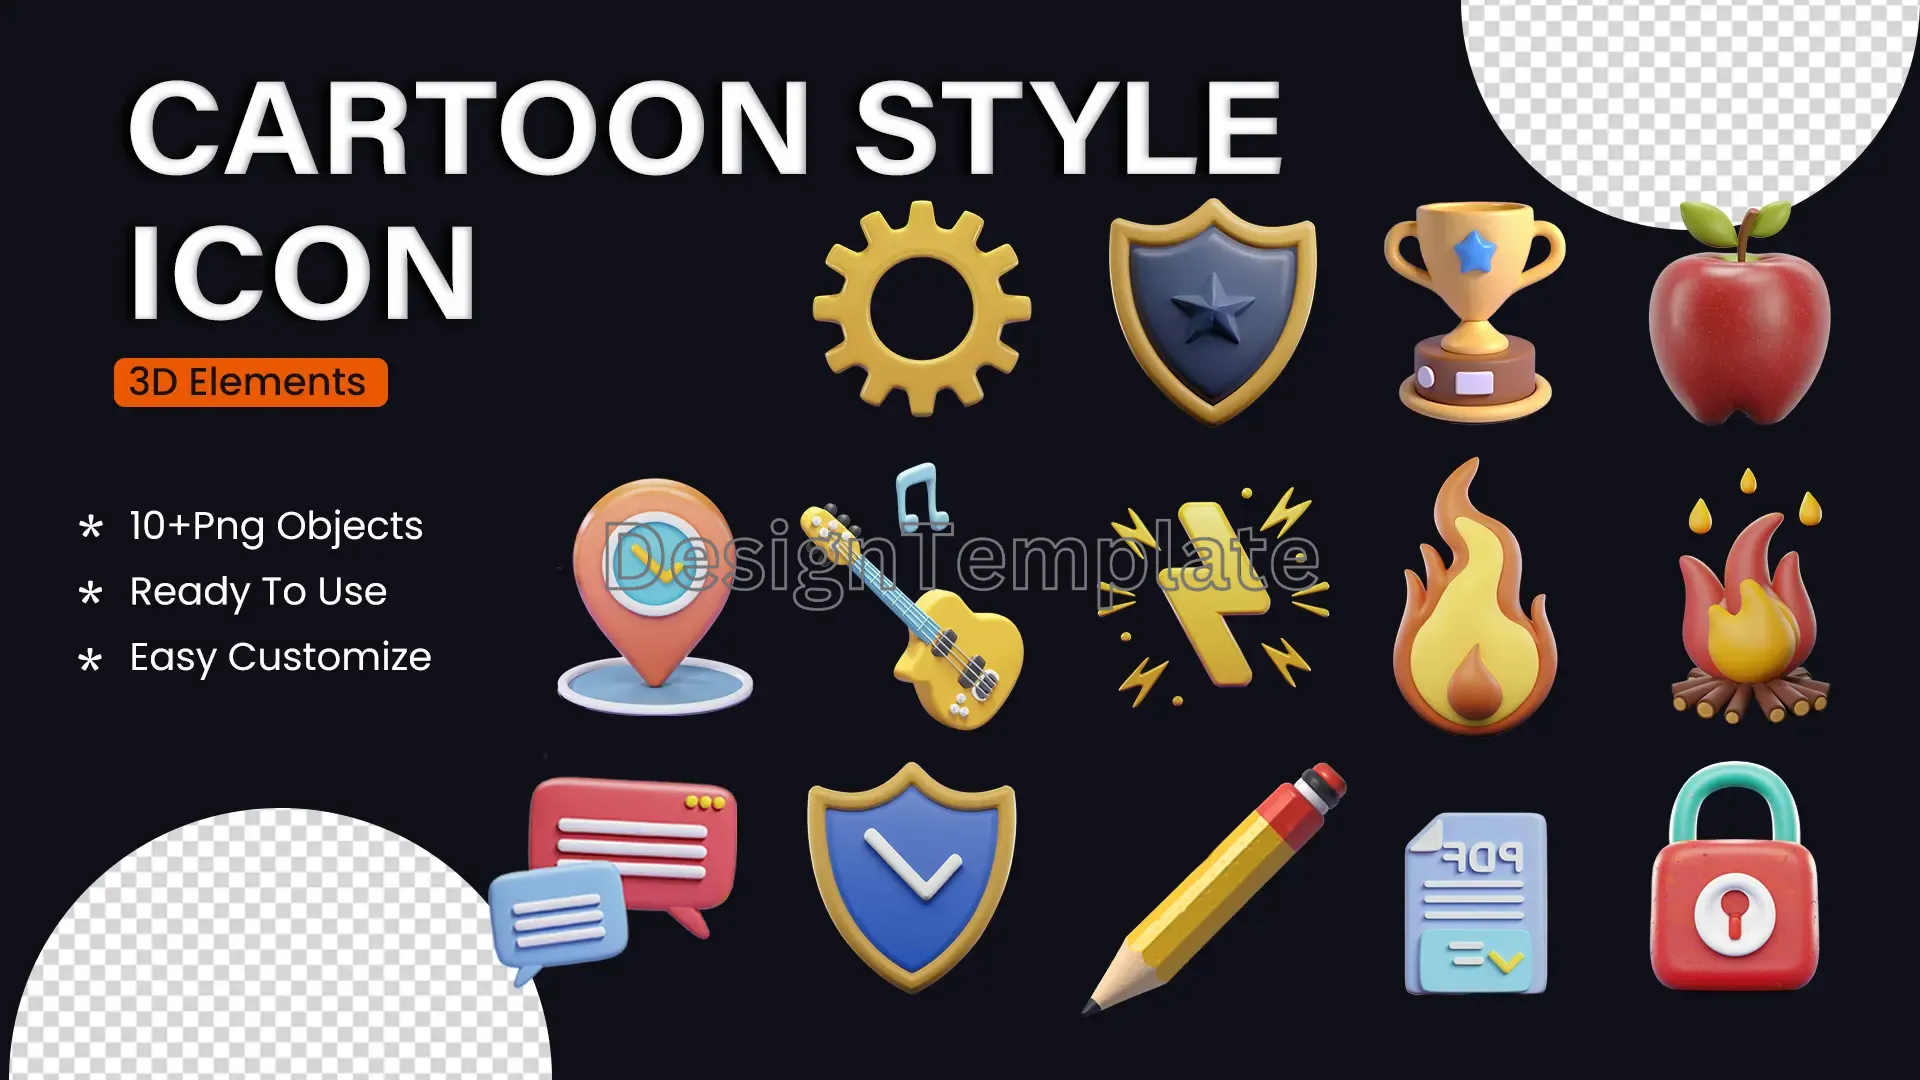 Cartoon Style Icon 3D Elements Pack image